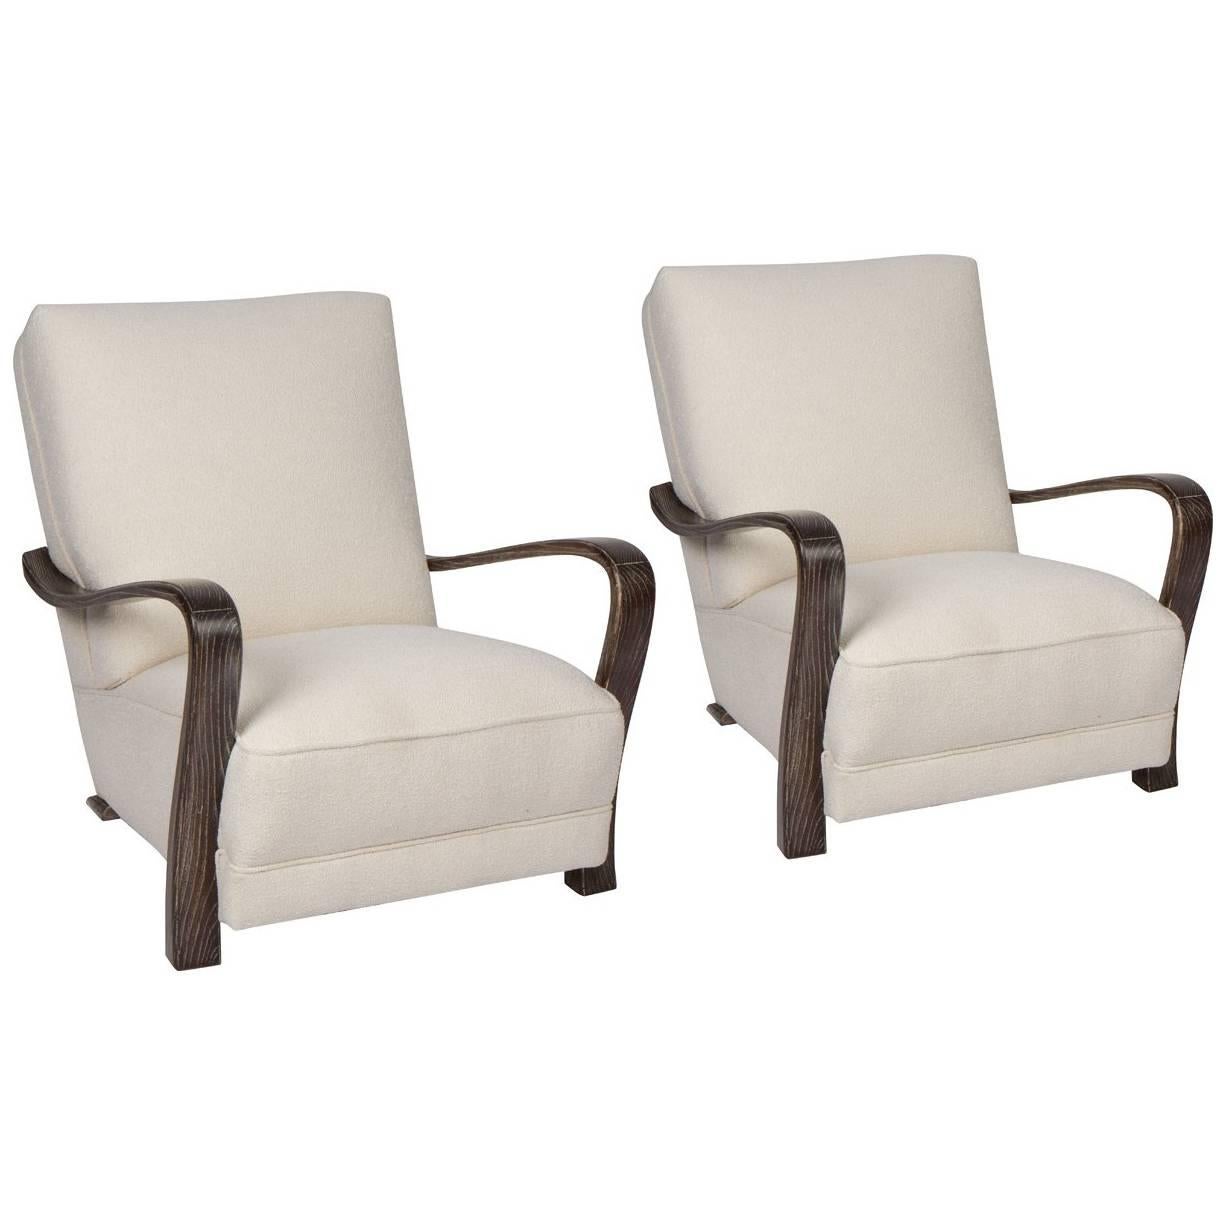 Pair of 1920s French Art Deco Lounge Chairs